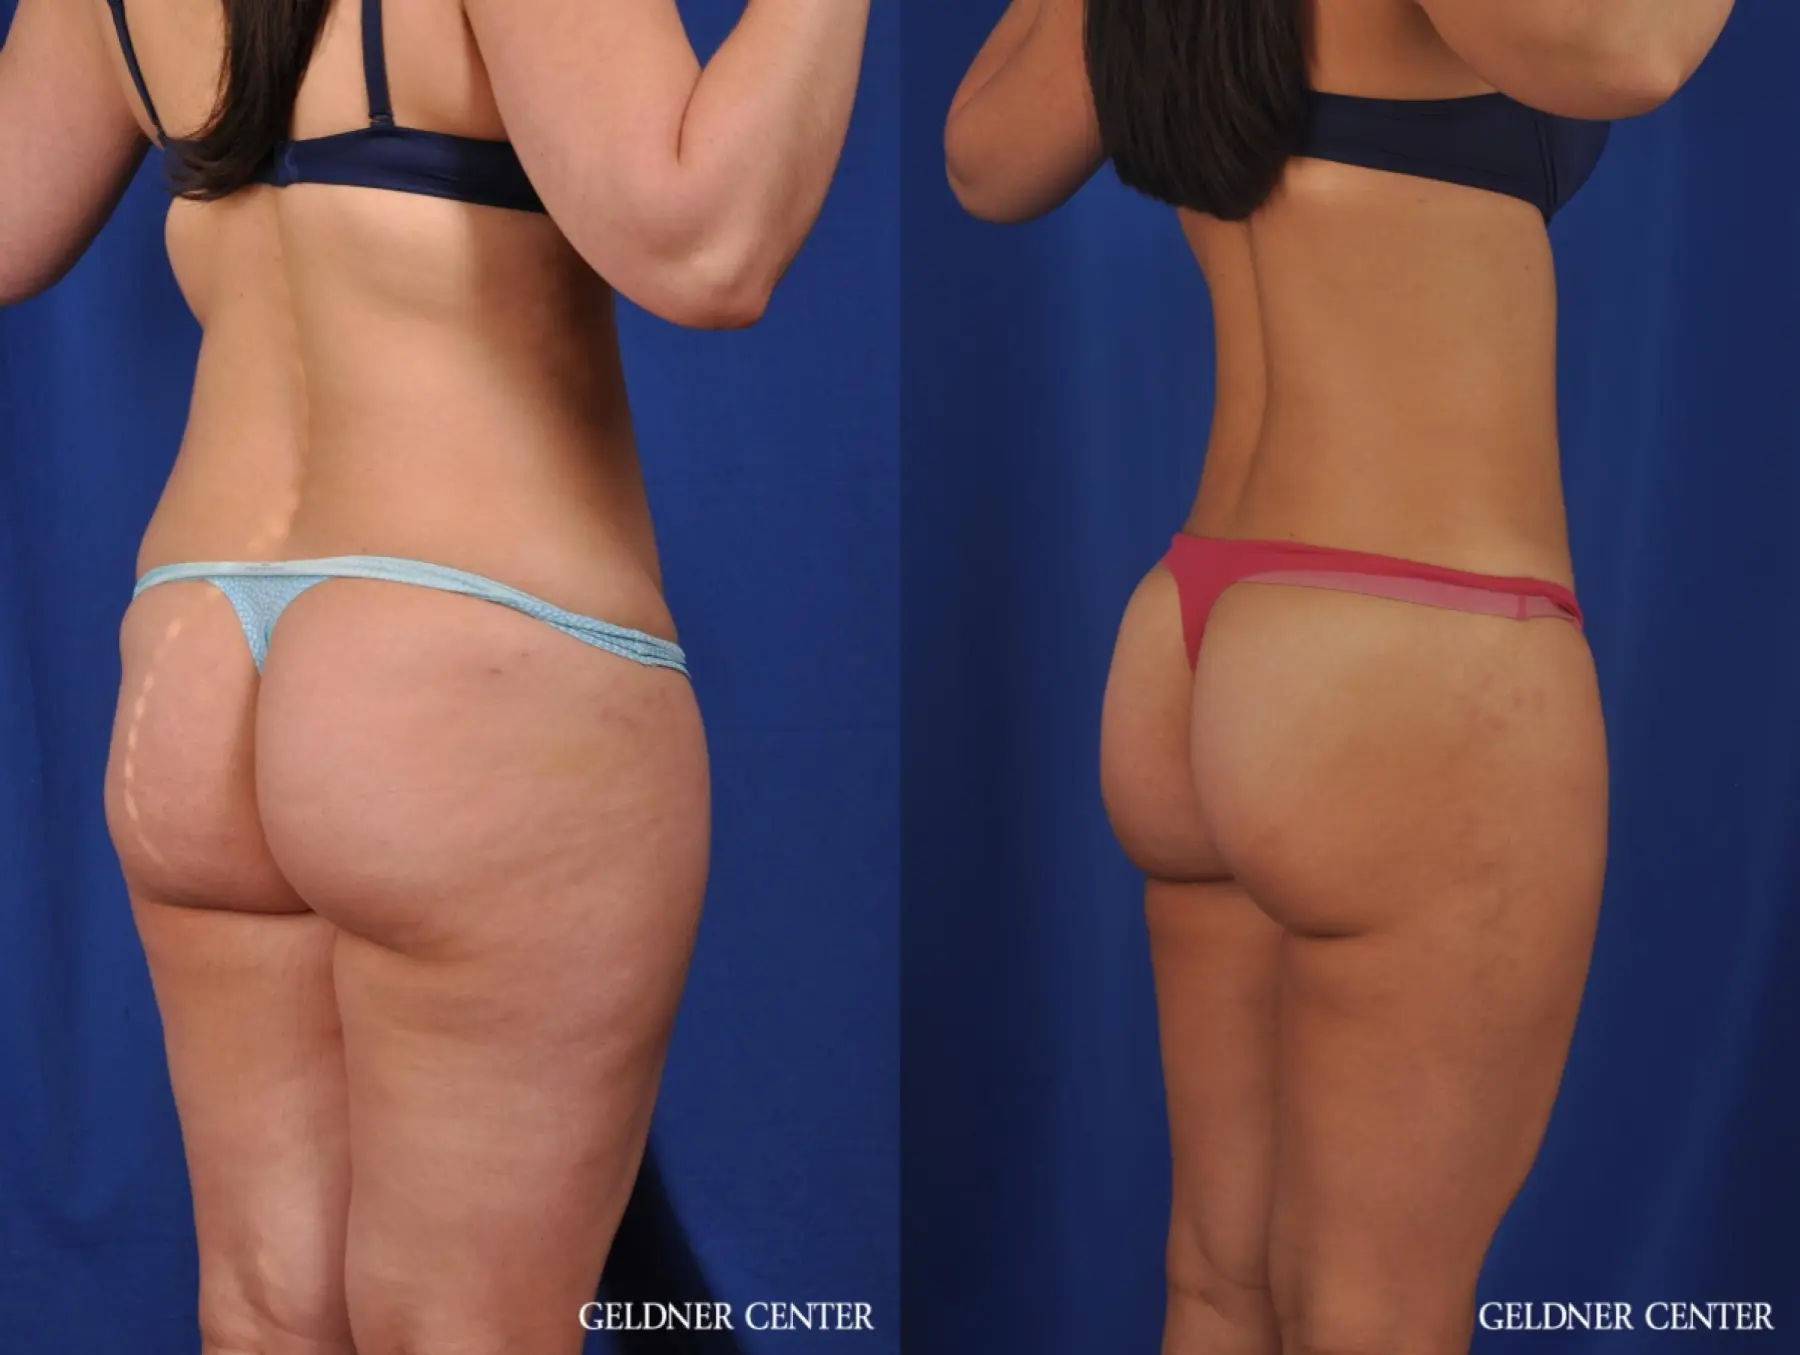 after lipo, after lipo Suppliers and Manufacturers at